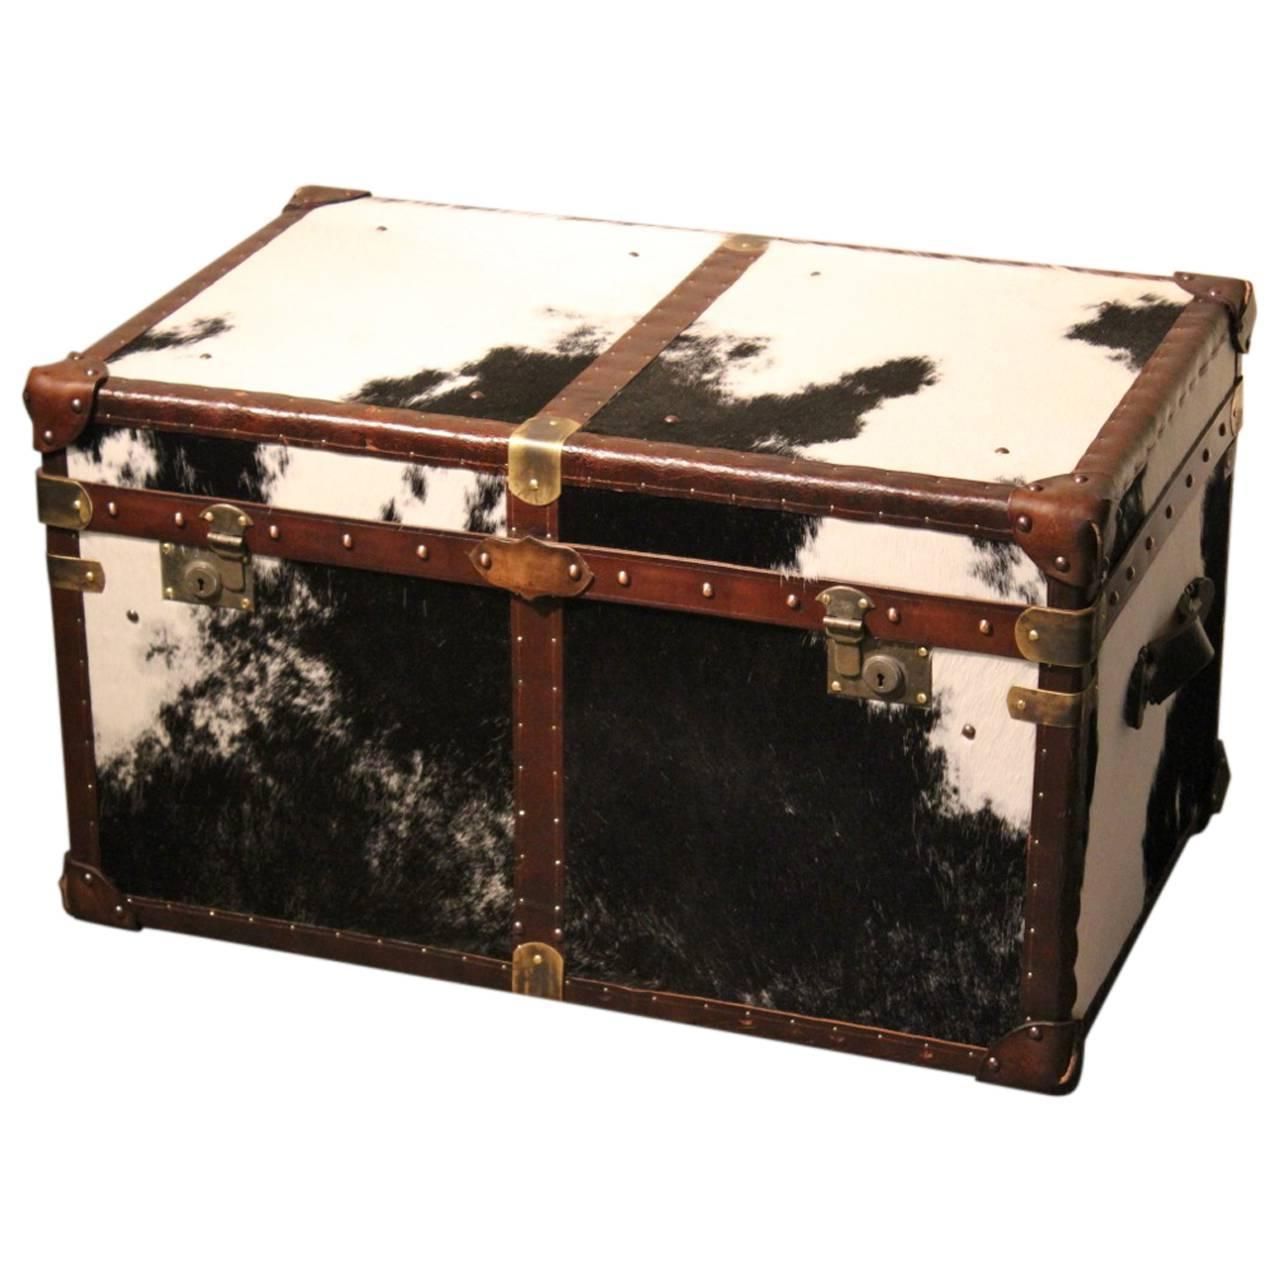 Bespoke Cowhide Trunk / Coffee Table At 1stdibs Regarding Latest Espresso Wood Trunk Cocktail Tables (Gallery 10 of 20)